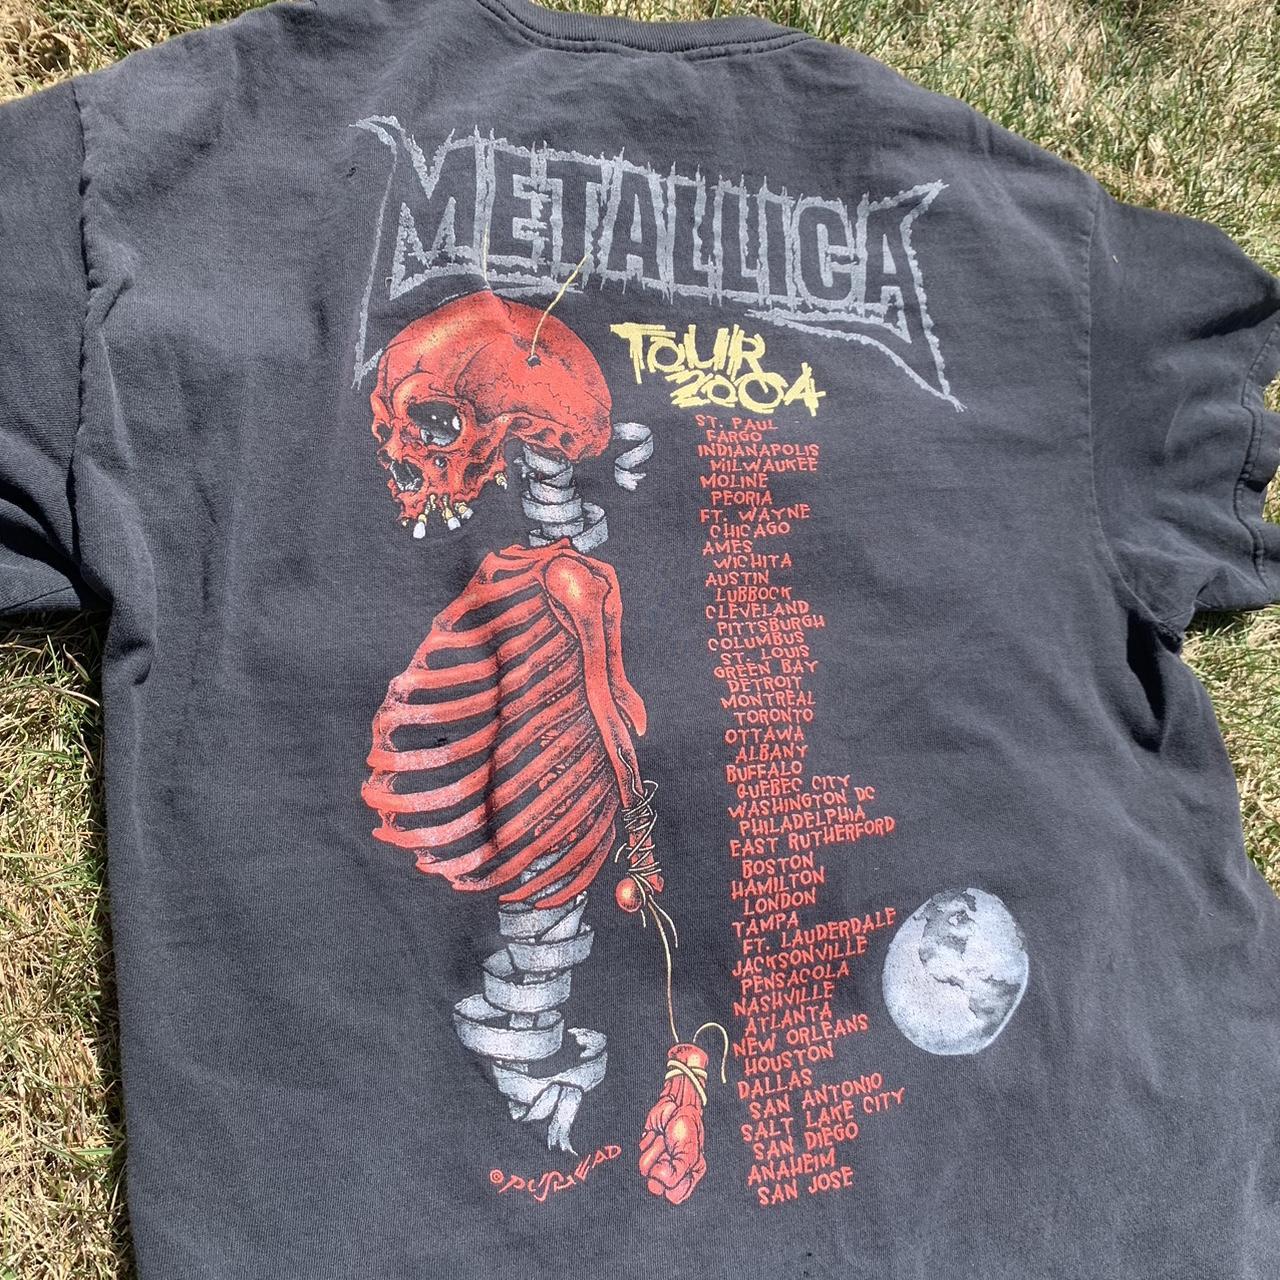 Vintage Metallica Madly in Anger With the World Tour With 